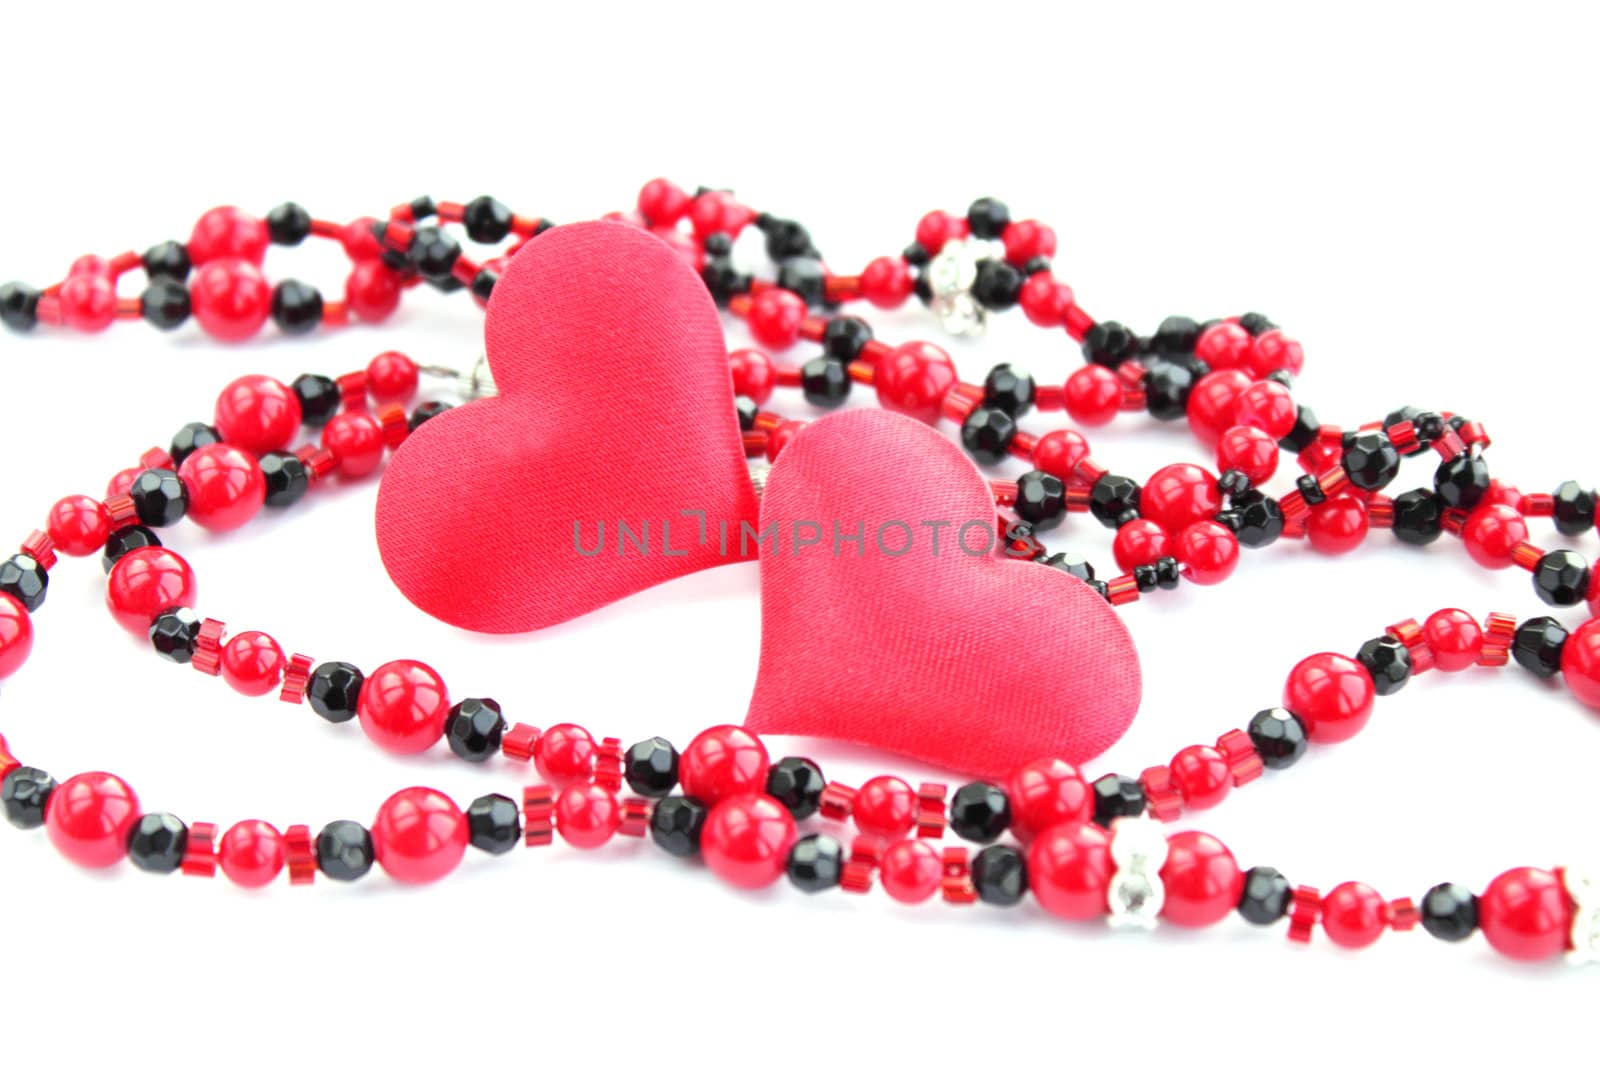 Pair of hearts with the beads during the day of saint Valentina